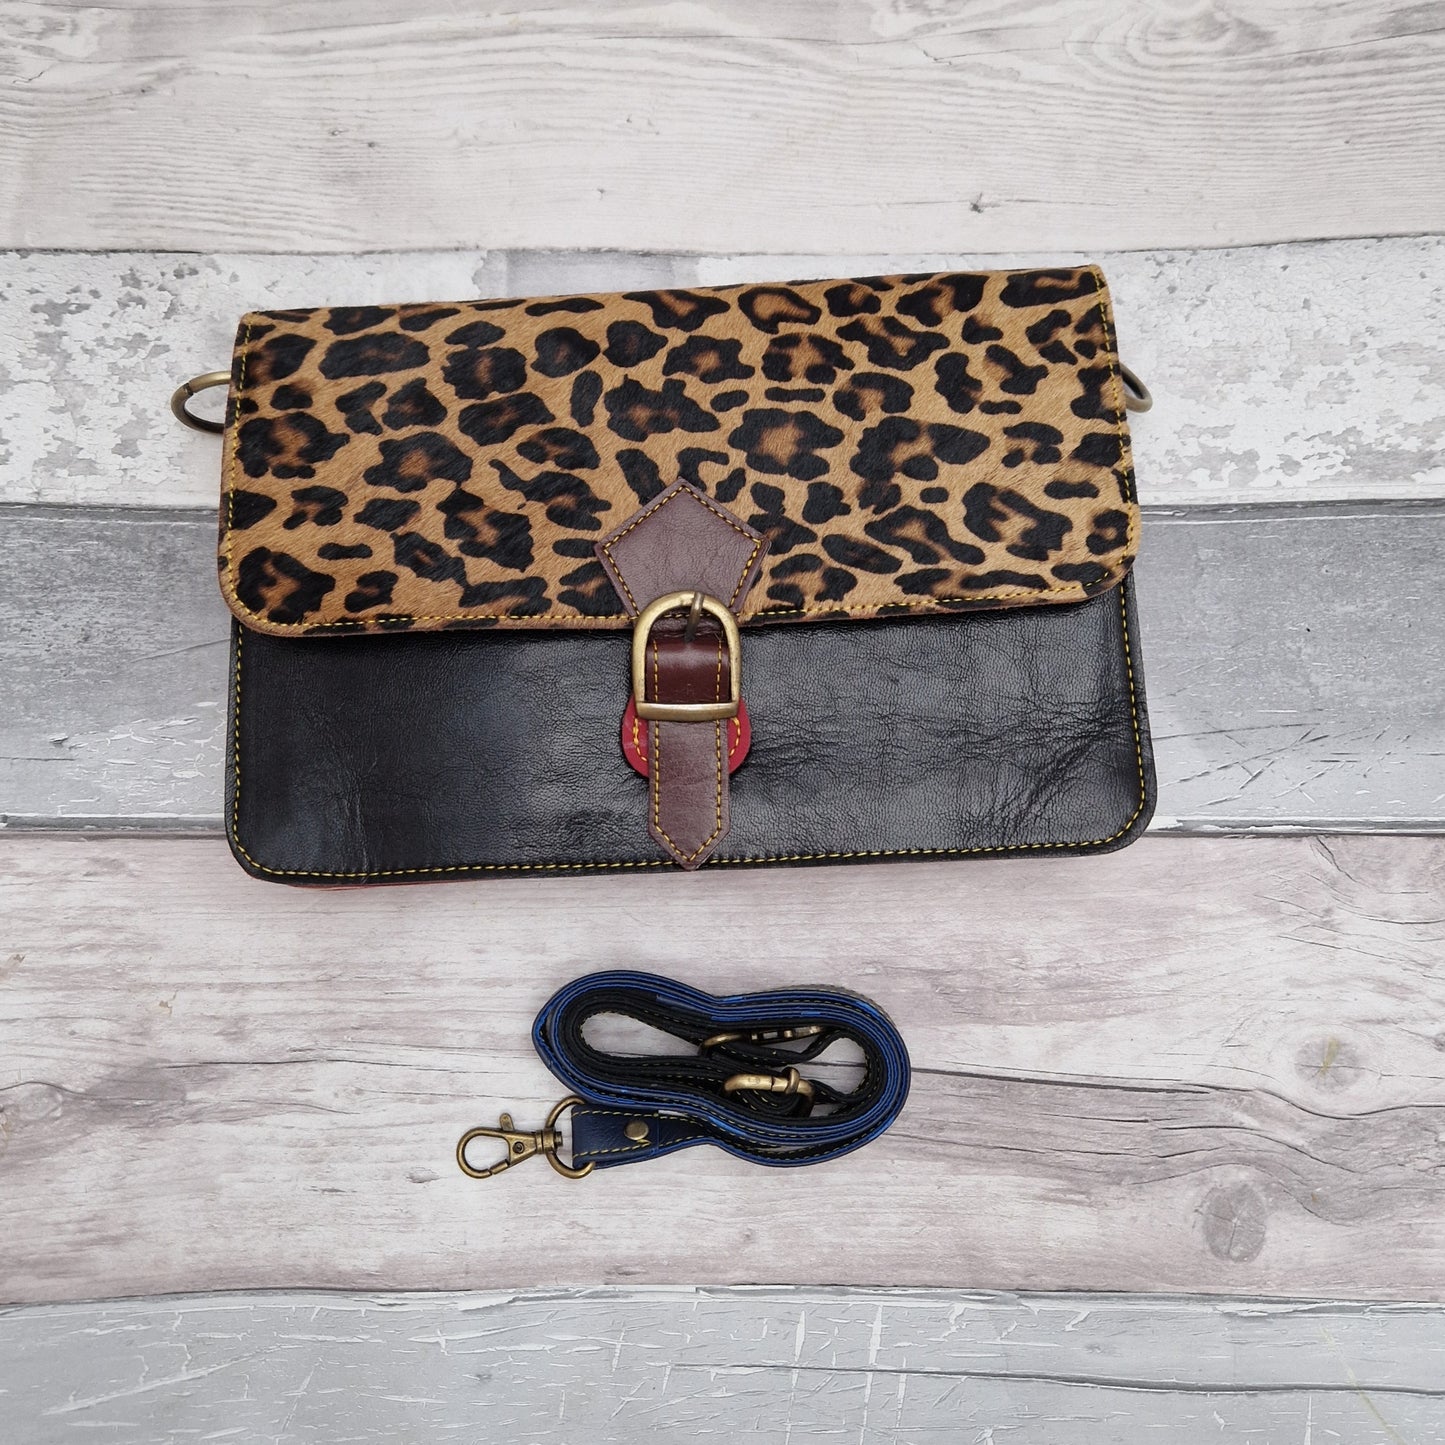 Black leather handbag with a textured leopard print panel.